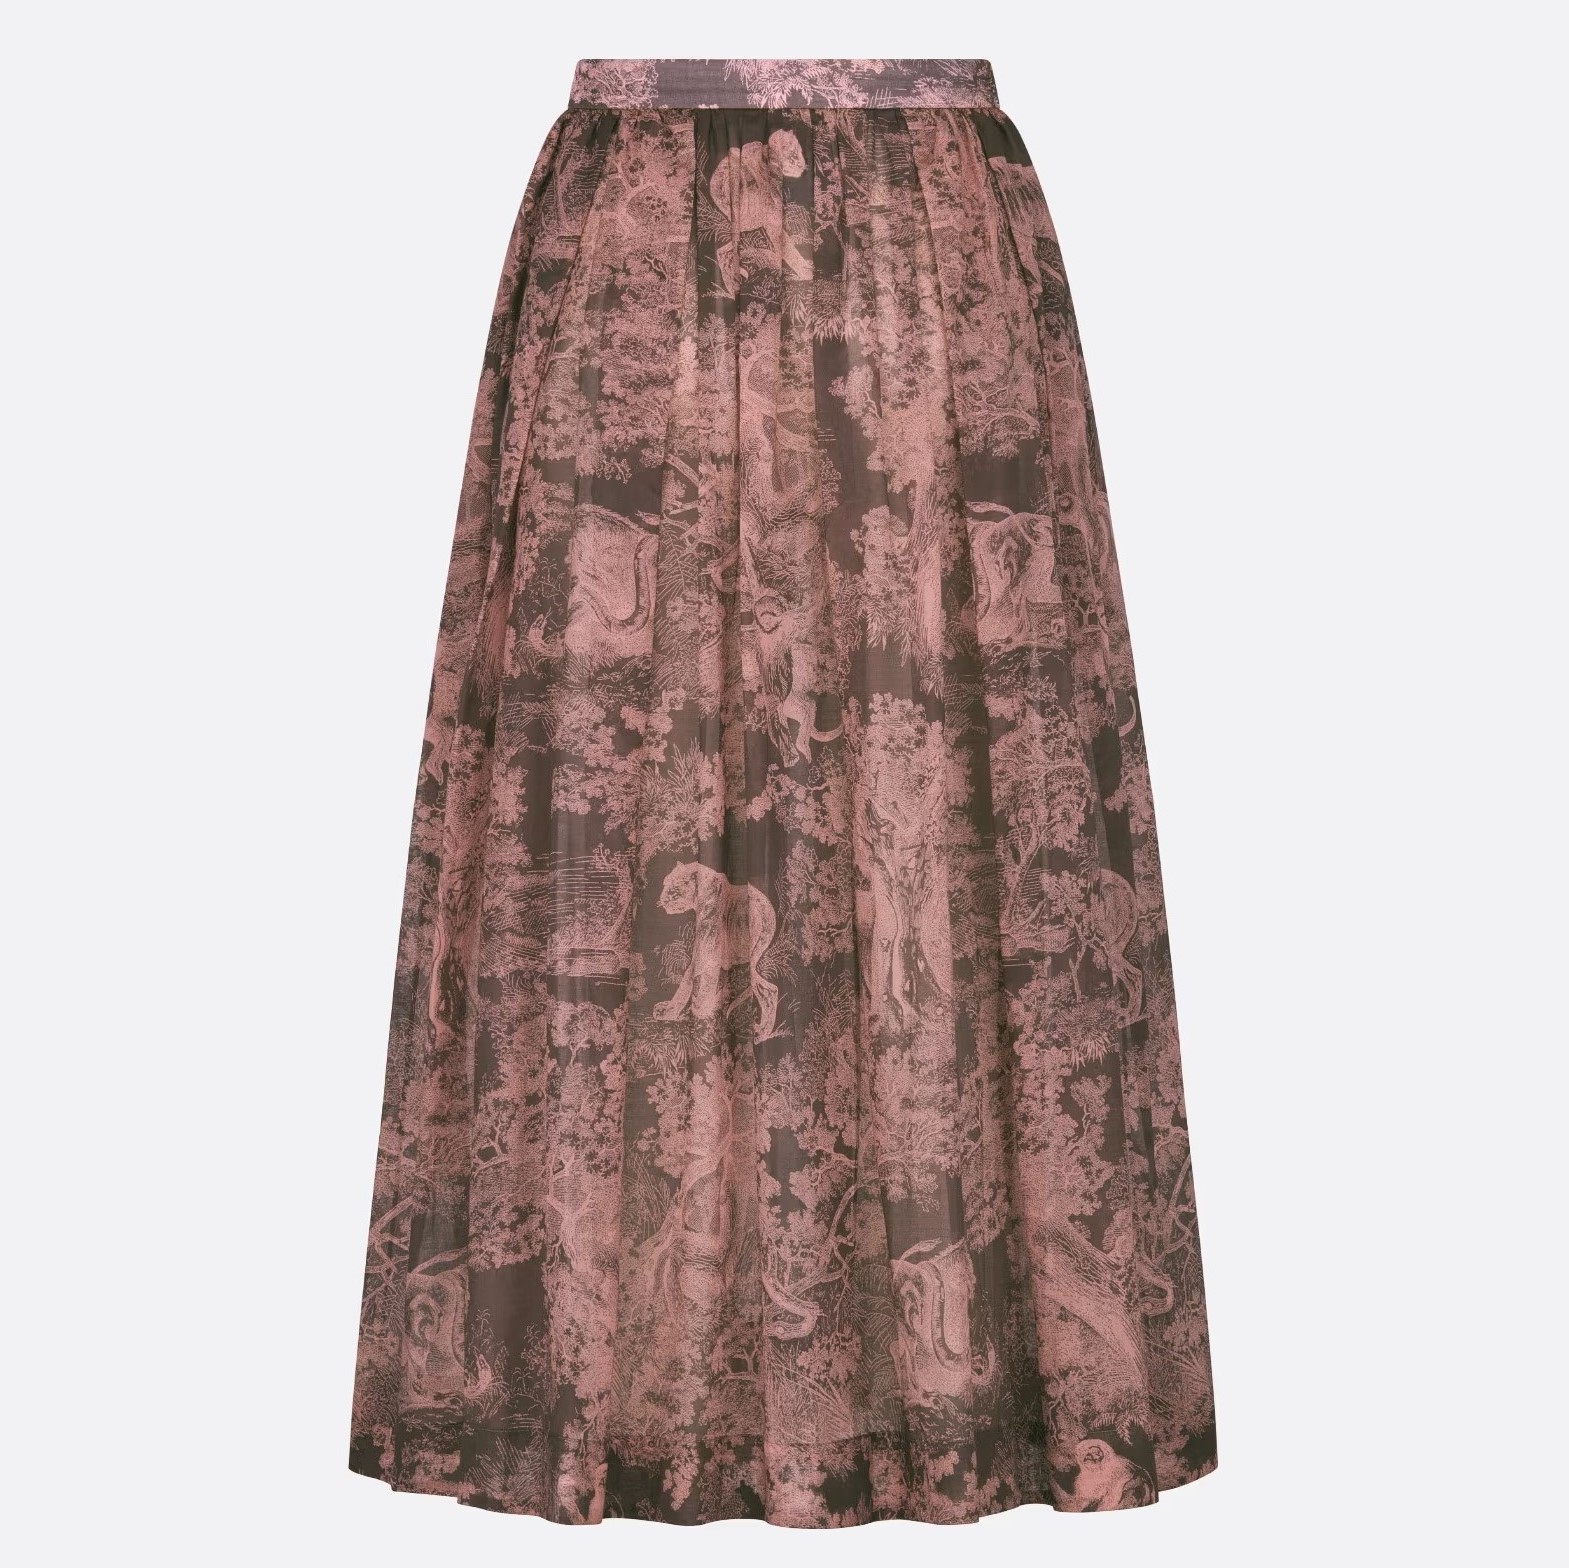 VÁY DIORIVIERA FLARED SKIRT GRAY AND PINK COTTON MUSLIN WITH TOILE DE JOUY REVERSE MOTIF 8